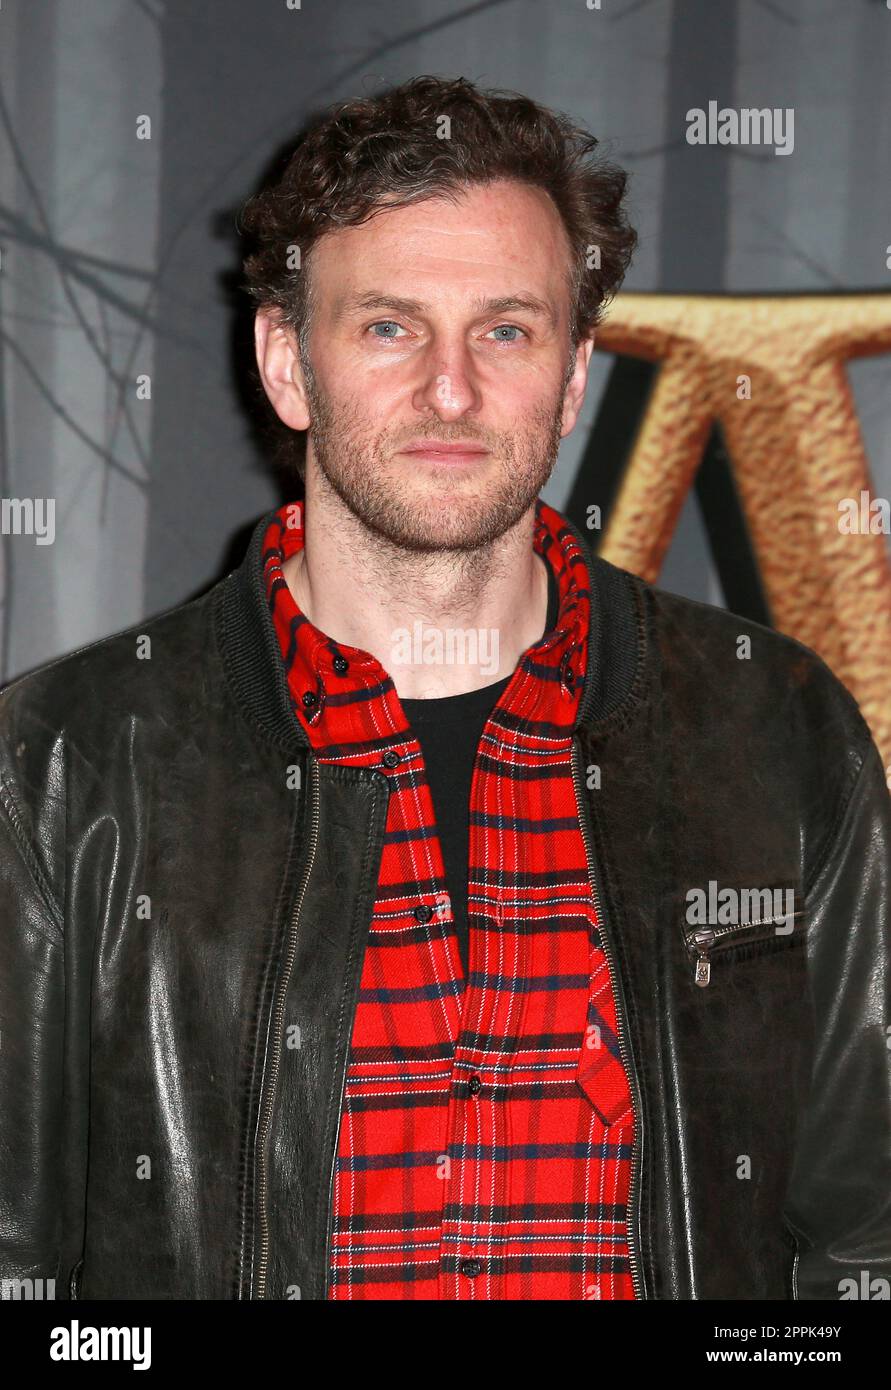 Steven Cree attends the 'Outlander' Season 6 premiere at The Royal Festival Hall in London. Stock Photo